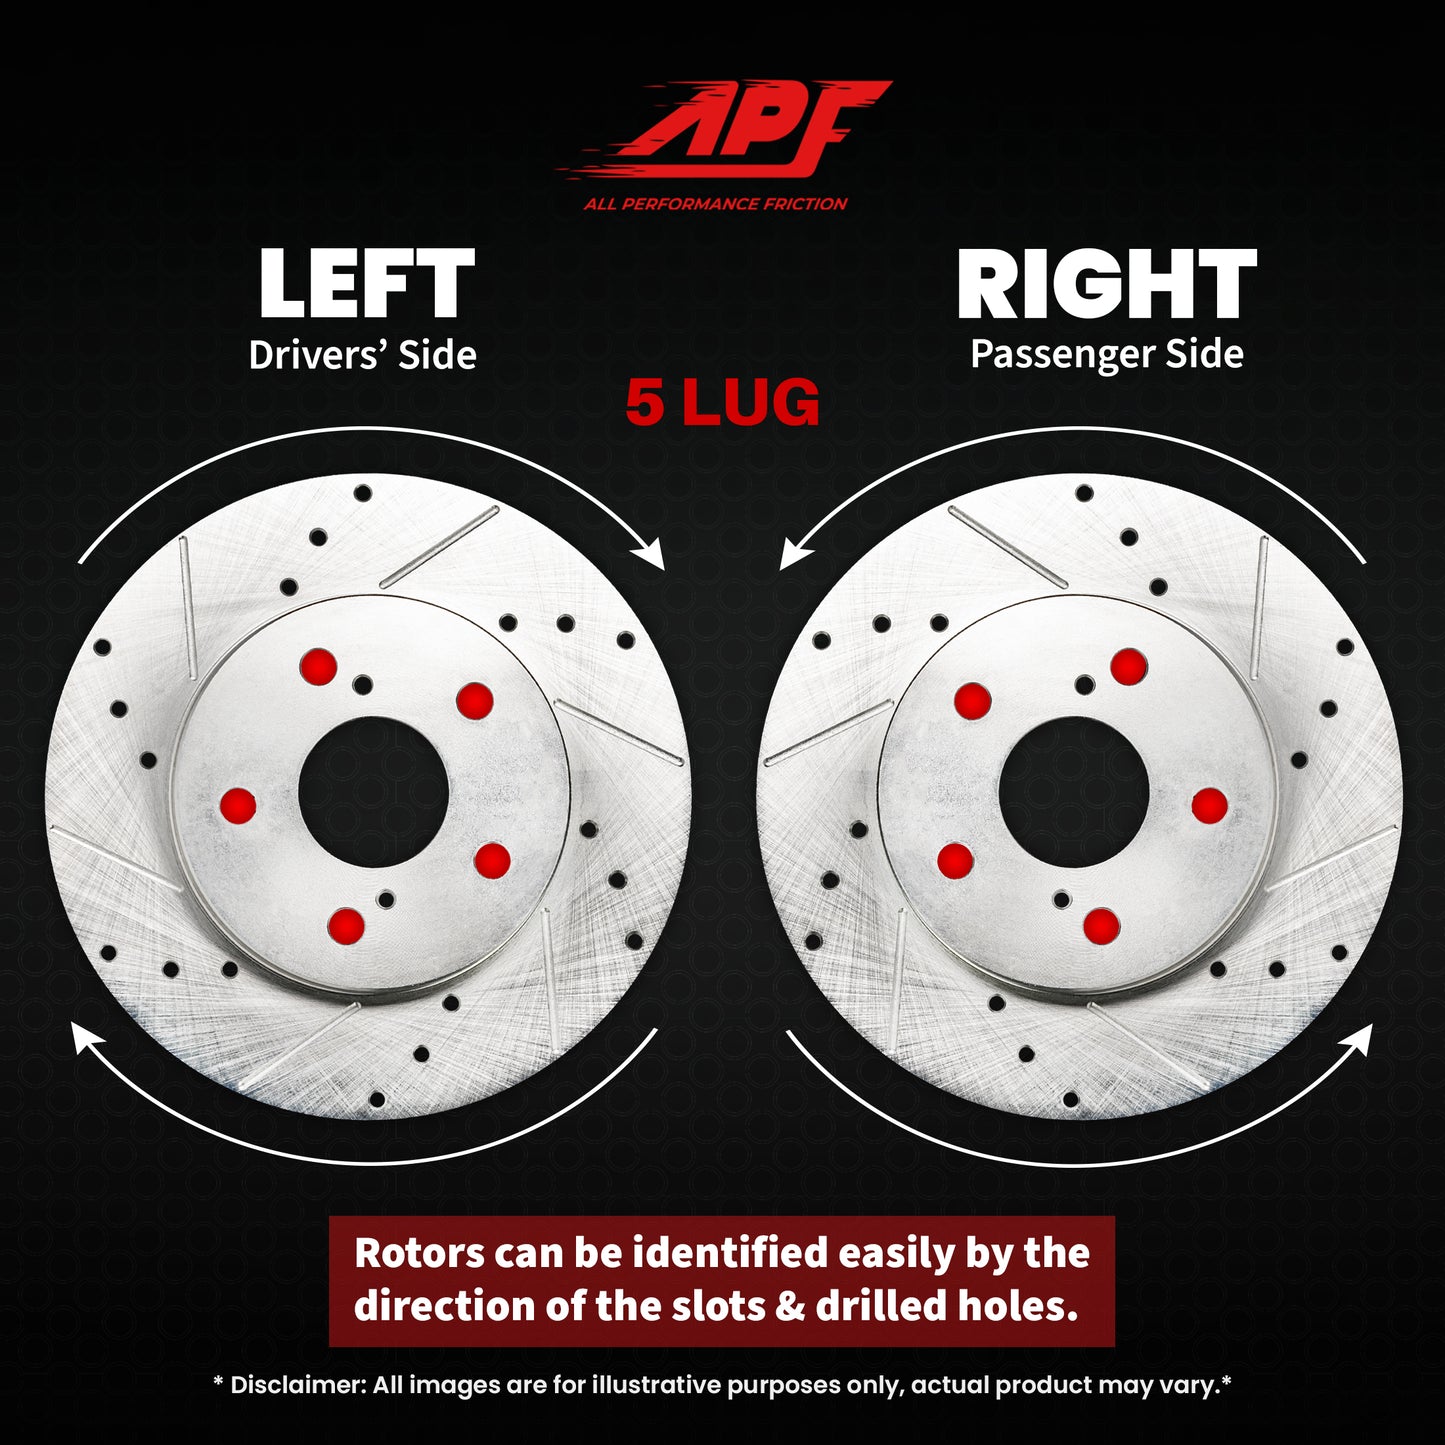 APF All Performance Friction Rear Rotors compatible with Audi A6 2012-2013 Zinc Drilled Slotted Rotors | $113.79